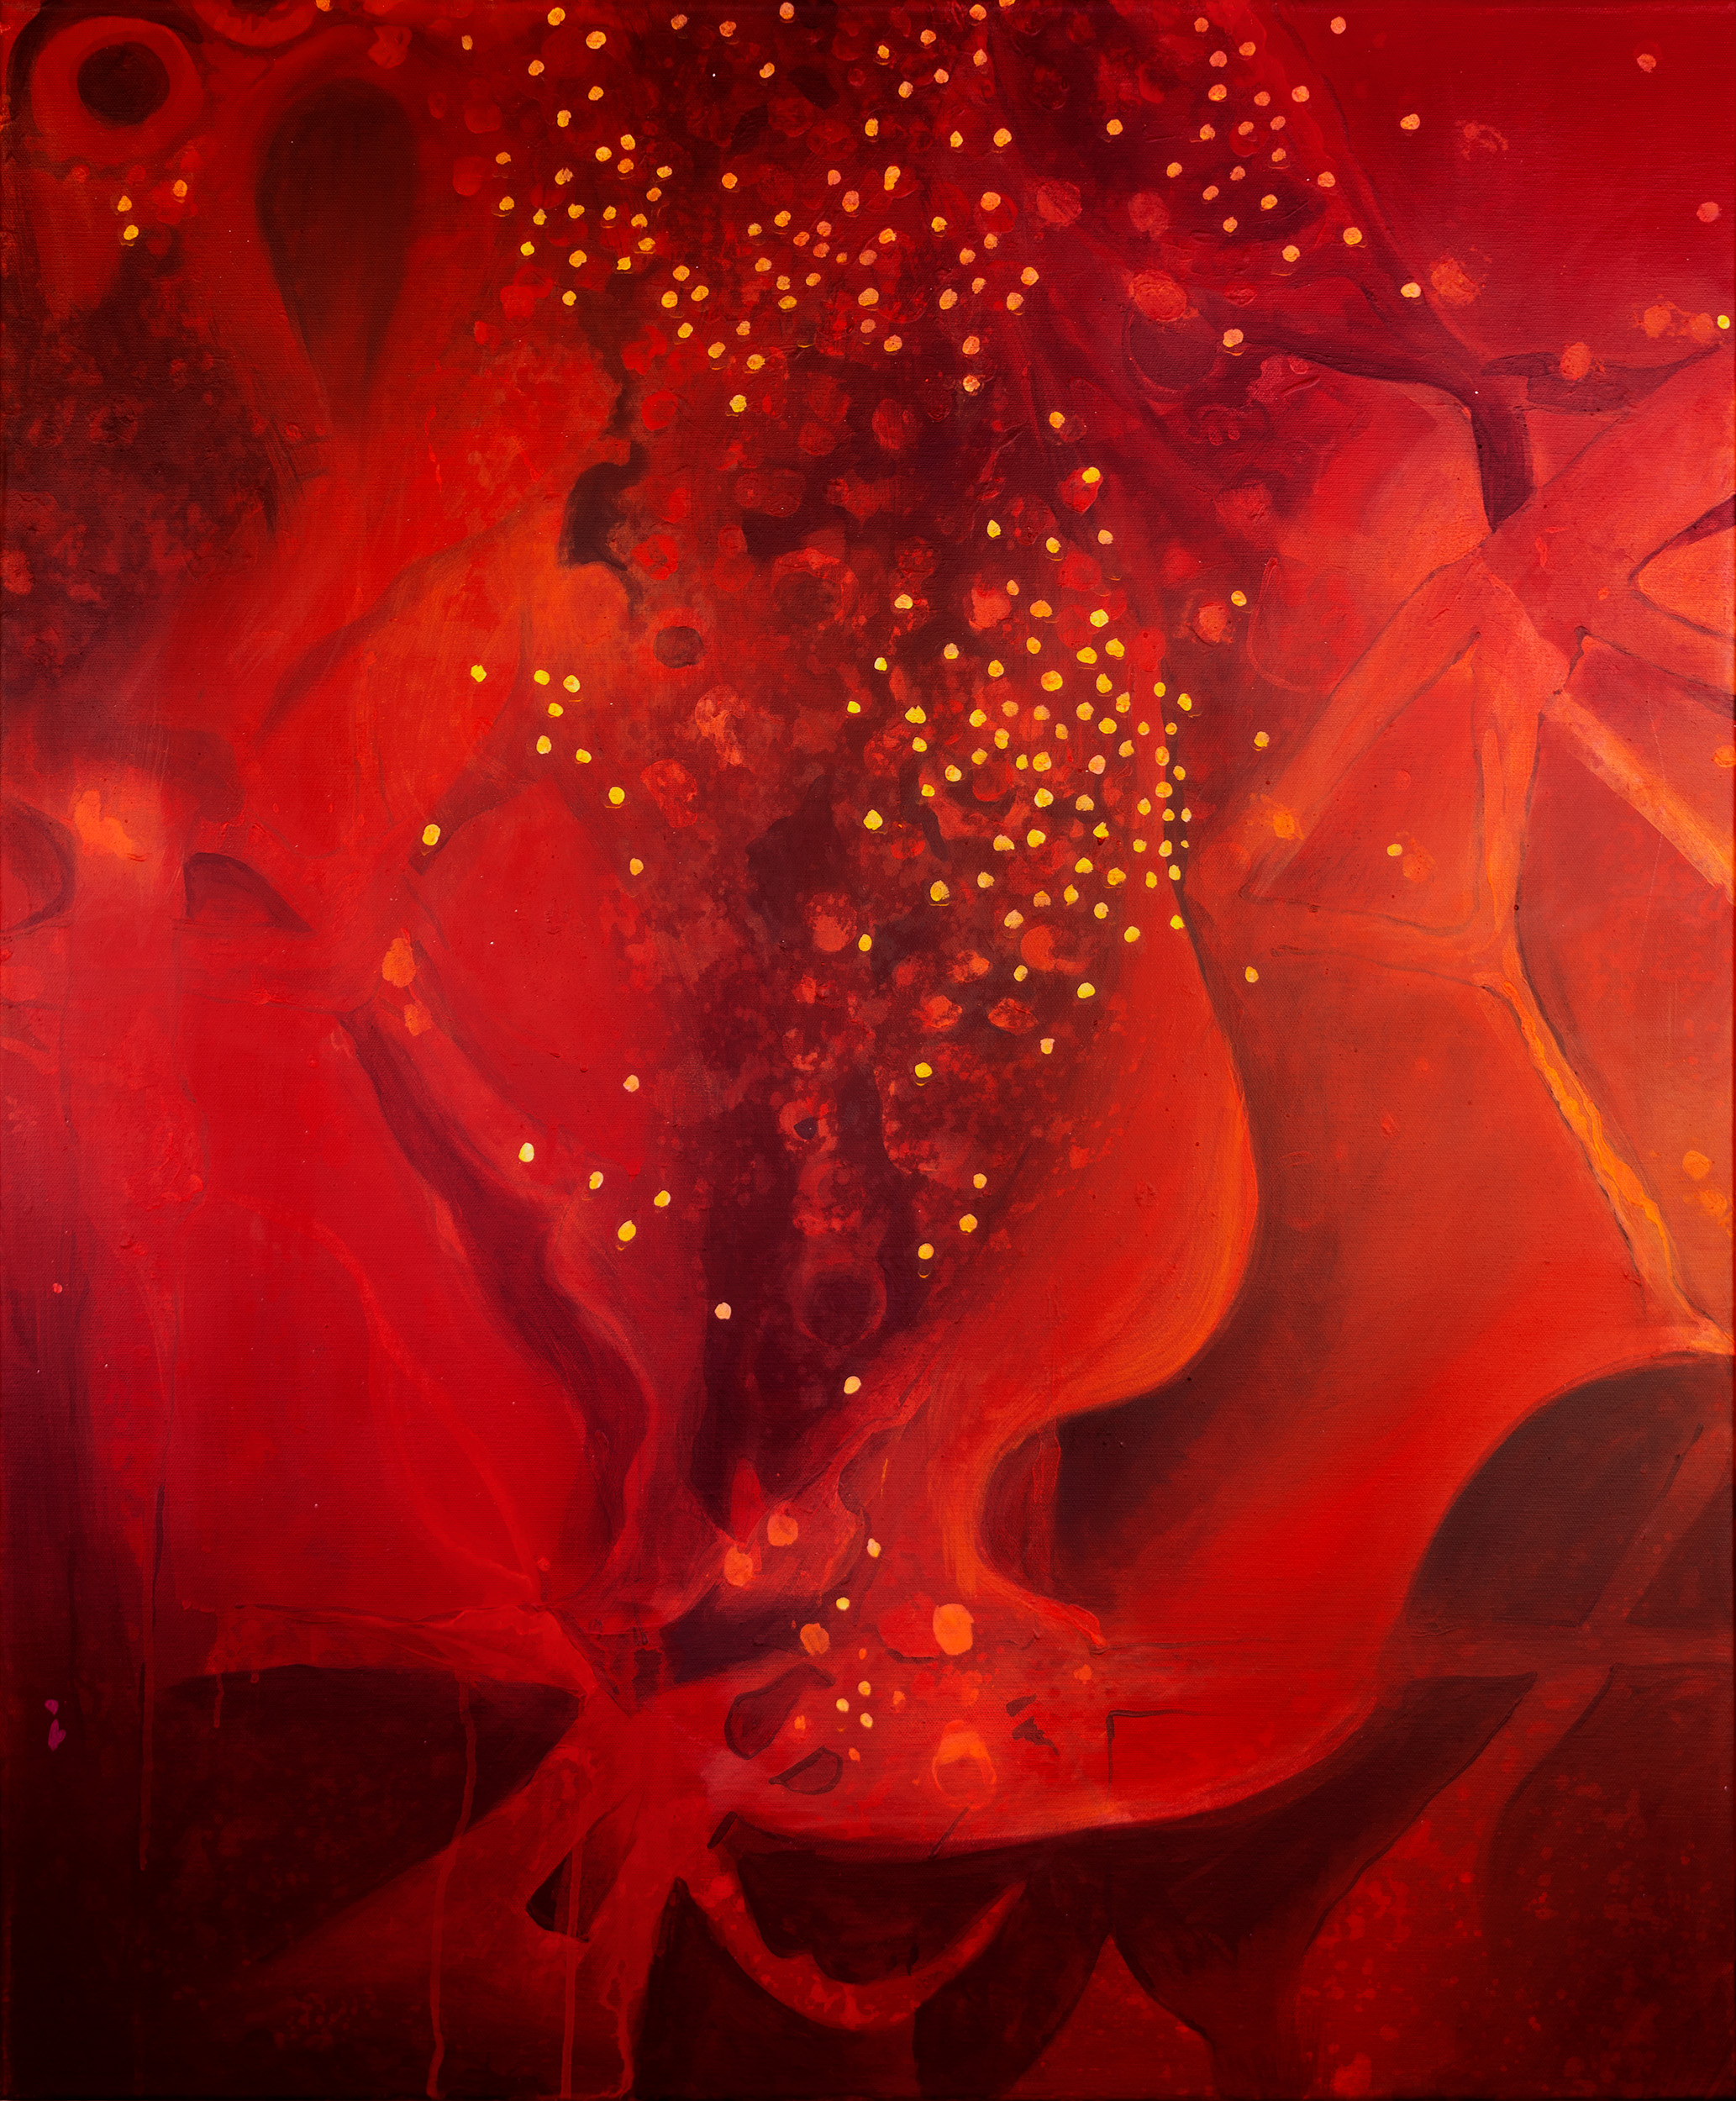 Red painting with flower, veins and red blood cells.